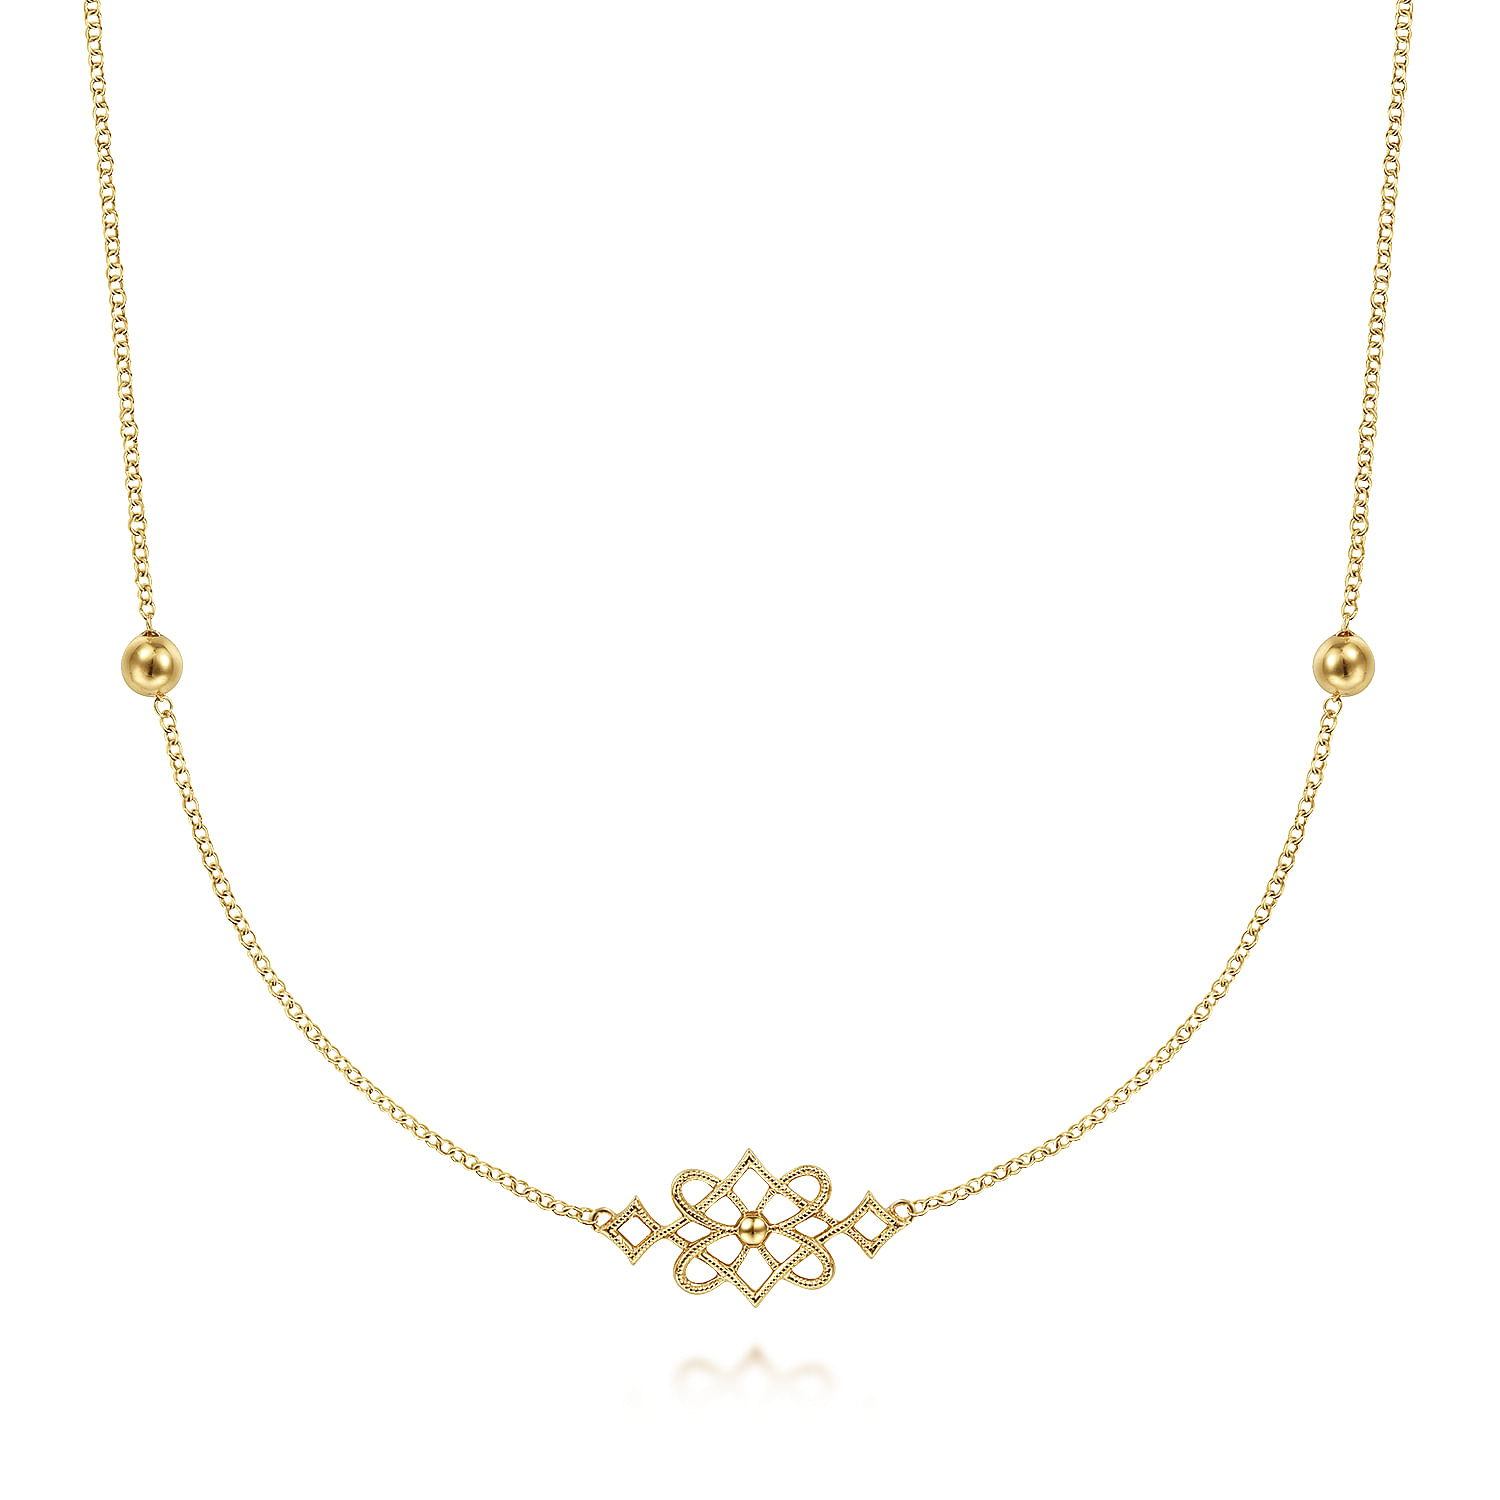 30 inch Vintage Inspired 14K Yellow Gold Filigree Station Necklace